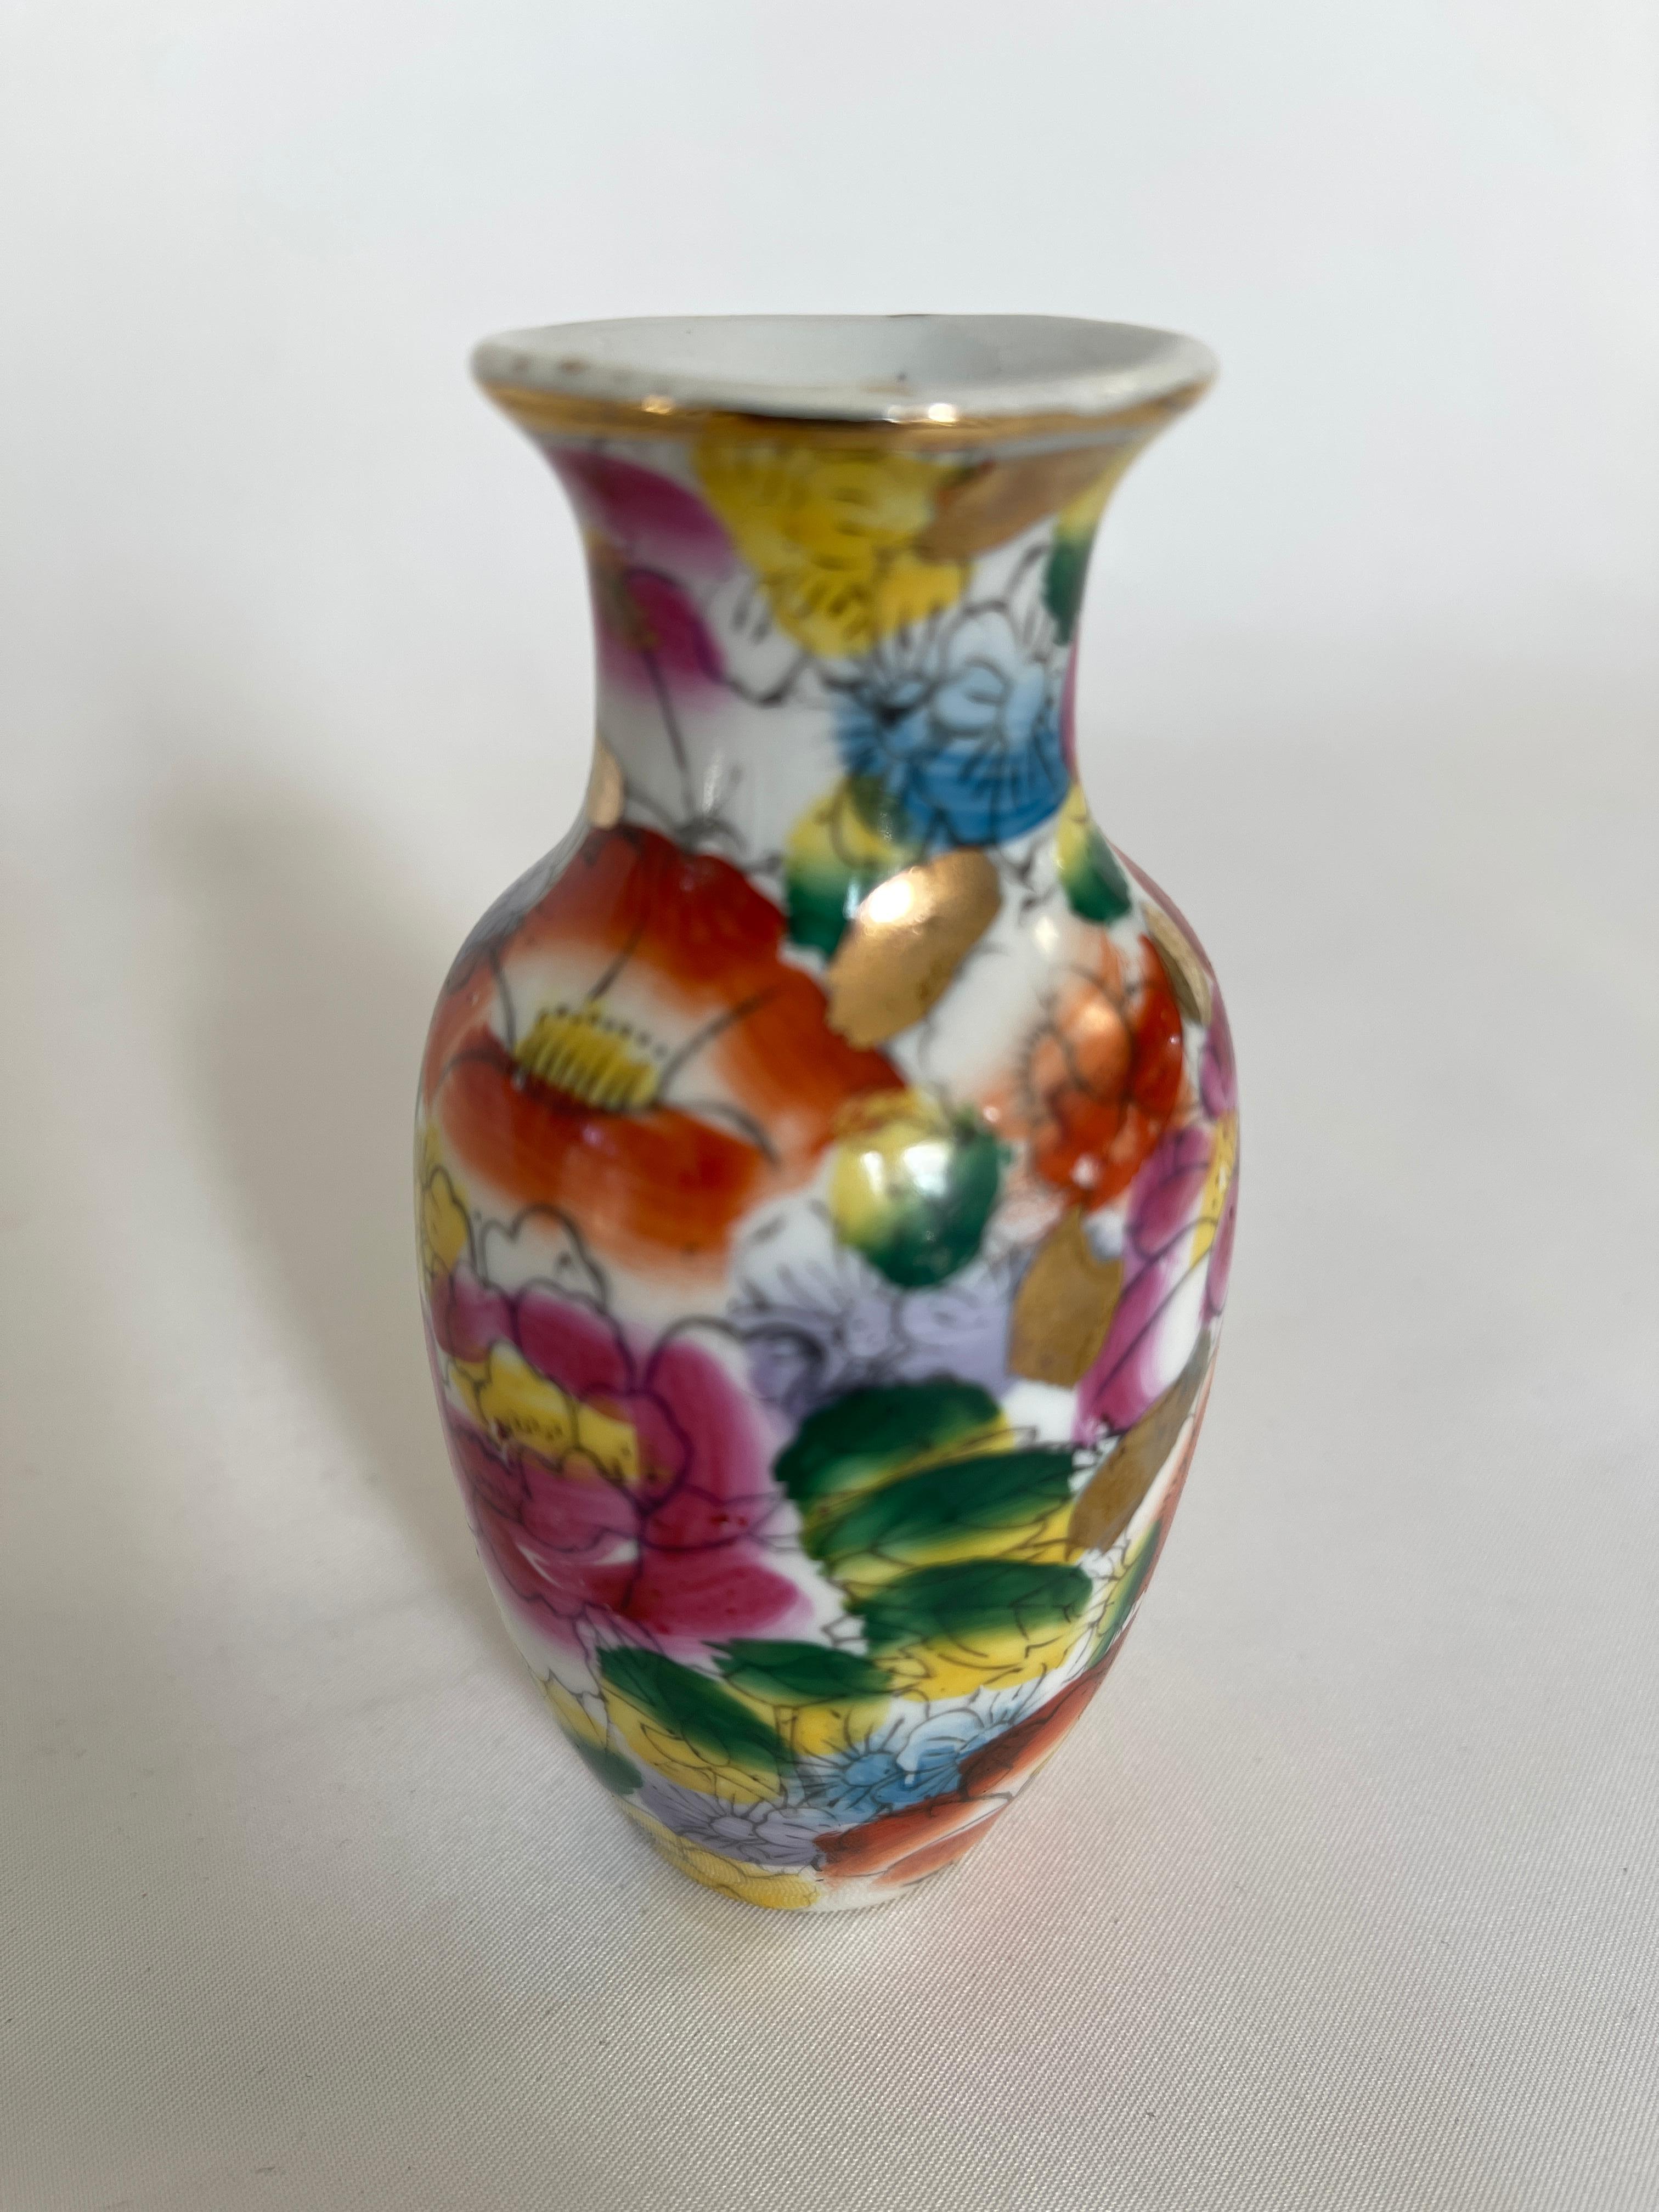 1920's Chinese export miniature ceramic vase, with hand painted floral decoration., and gilt rim. Stamped Made In China on bottom.